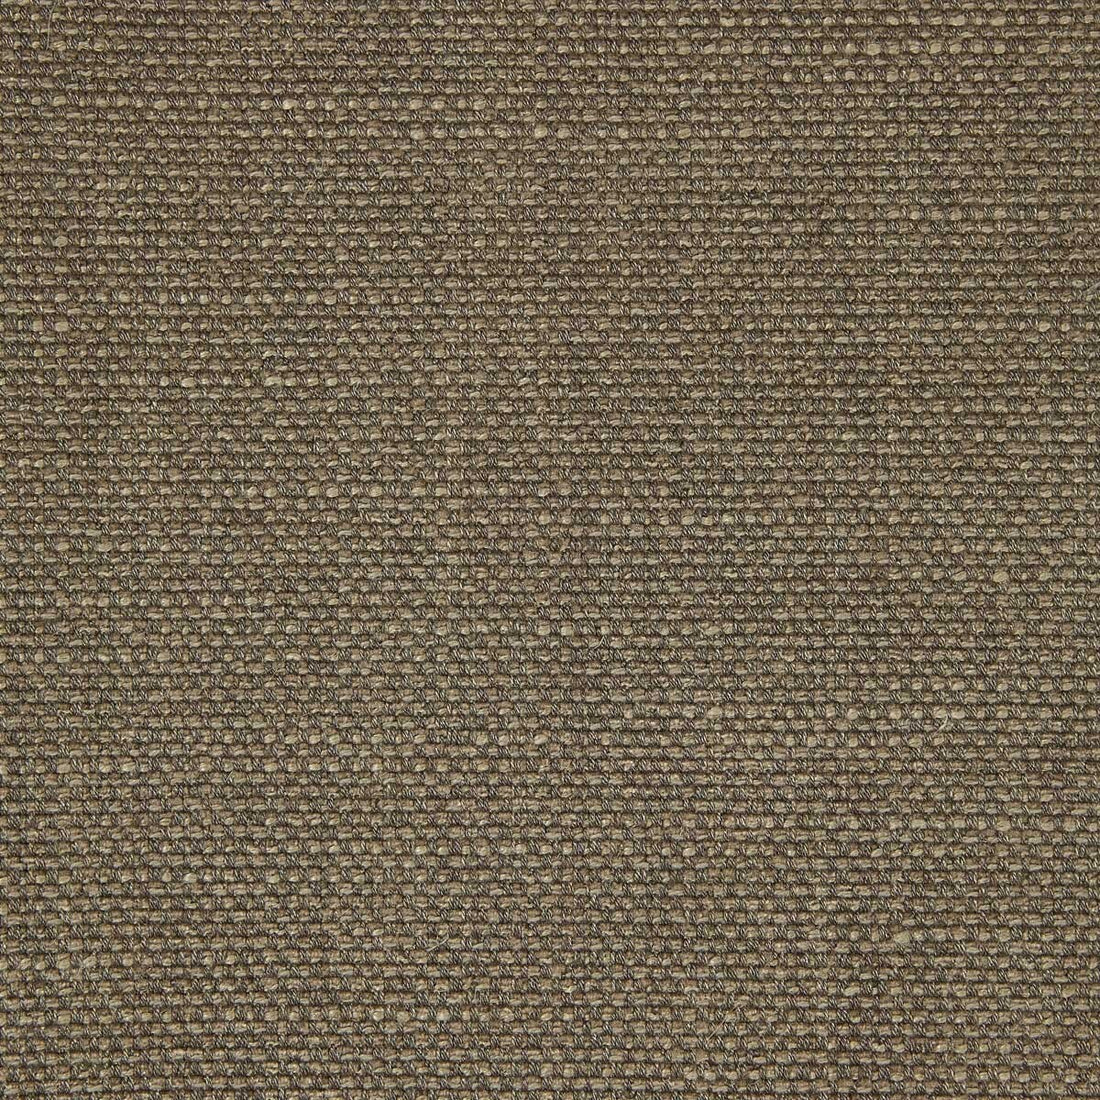 Godai fabric in 1 color - pattern LZ-30349.01.0 - by Kravet Design in the Lizzo collection